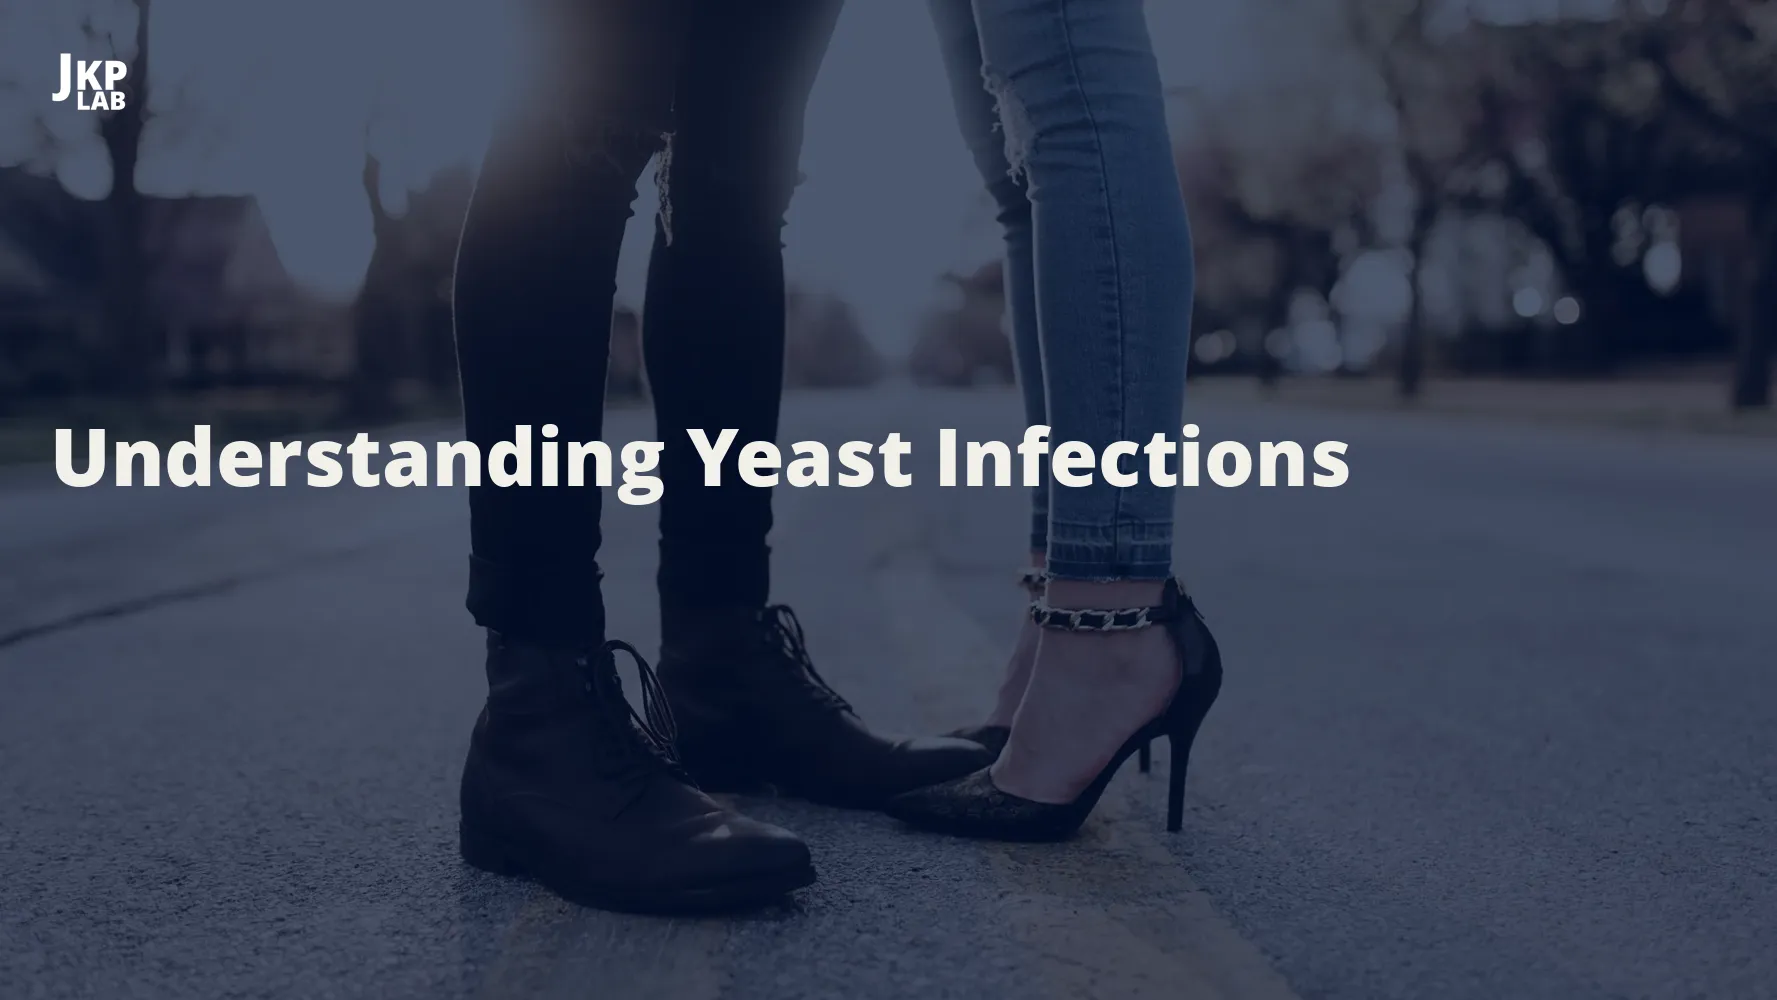 Yeast Infections and Painful Intercourse